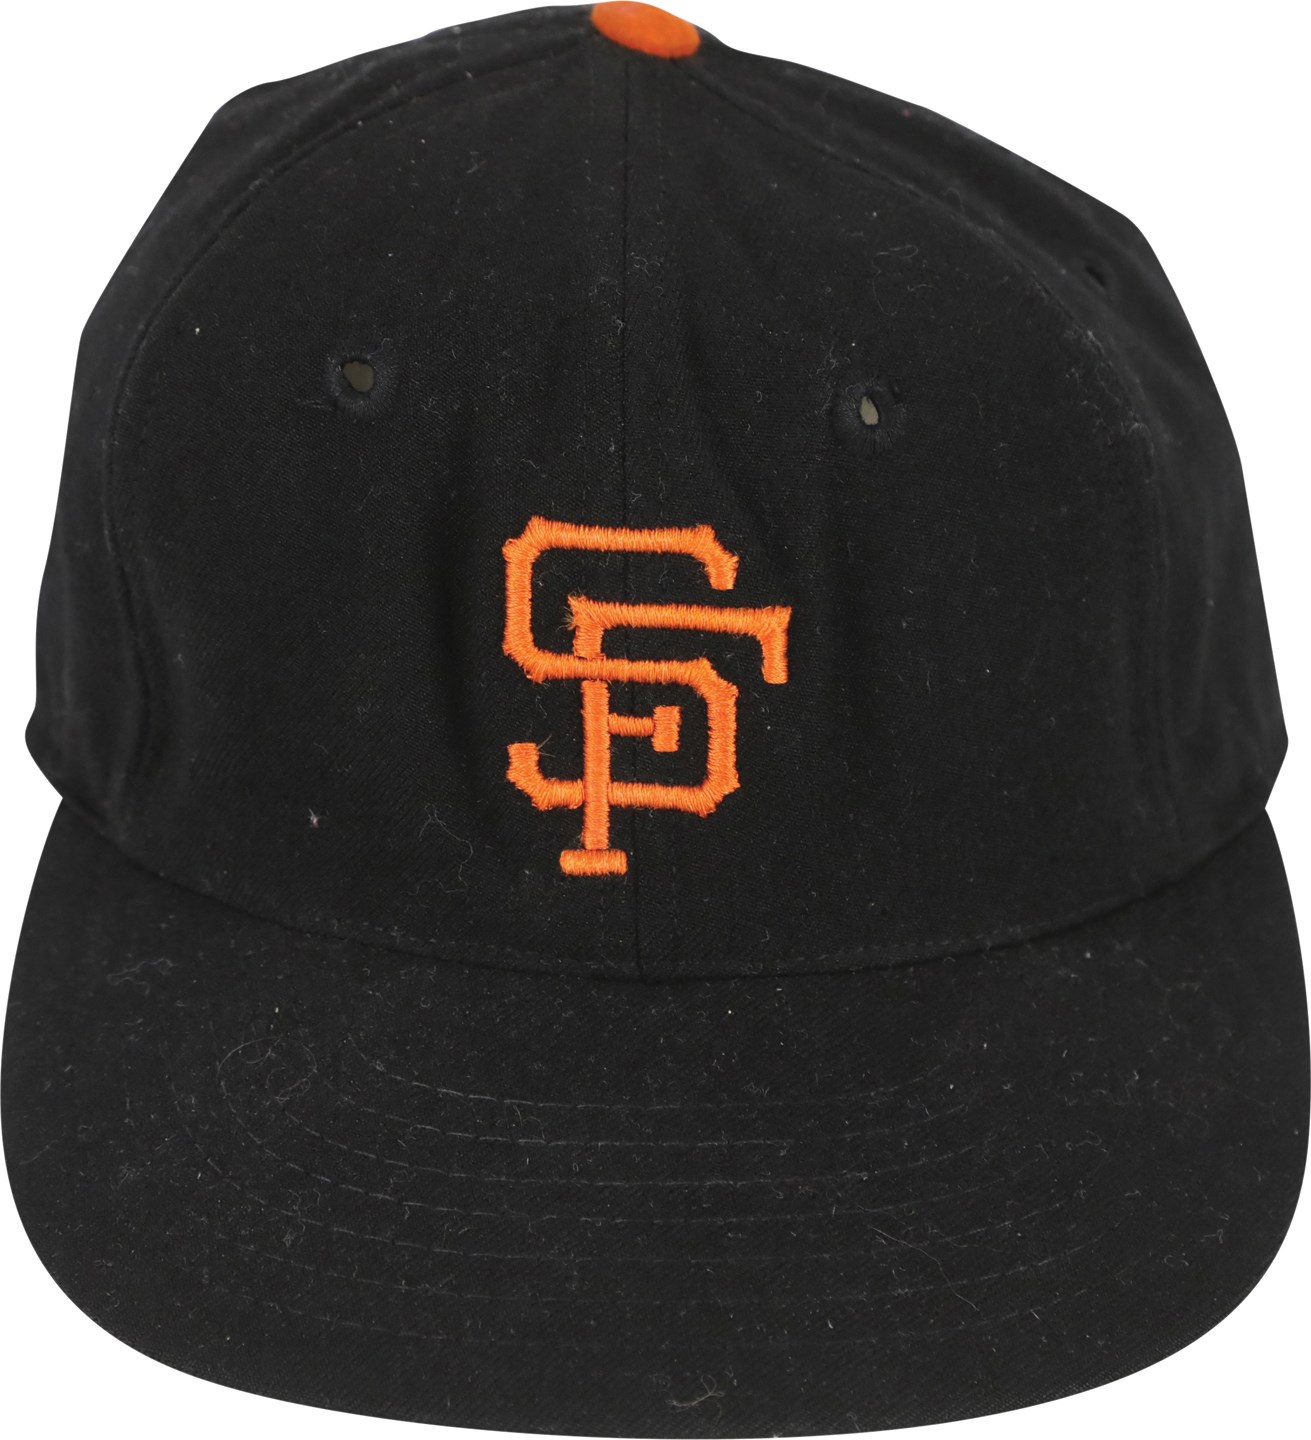 - 1960-67 San Francisco Giants Game Worn Hat Attributed to Willie Mays